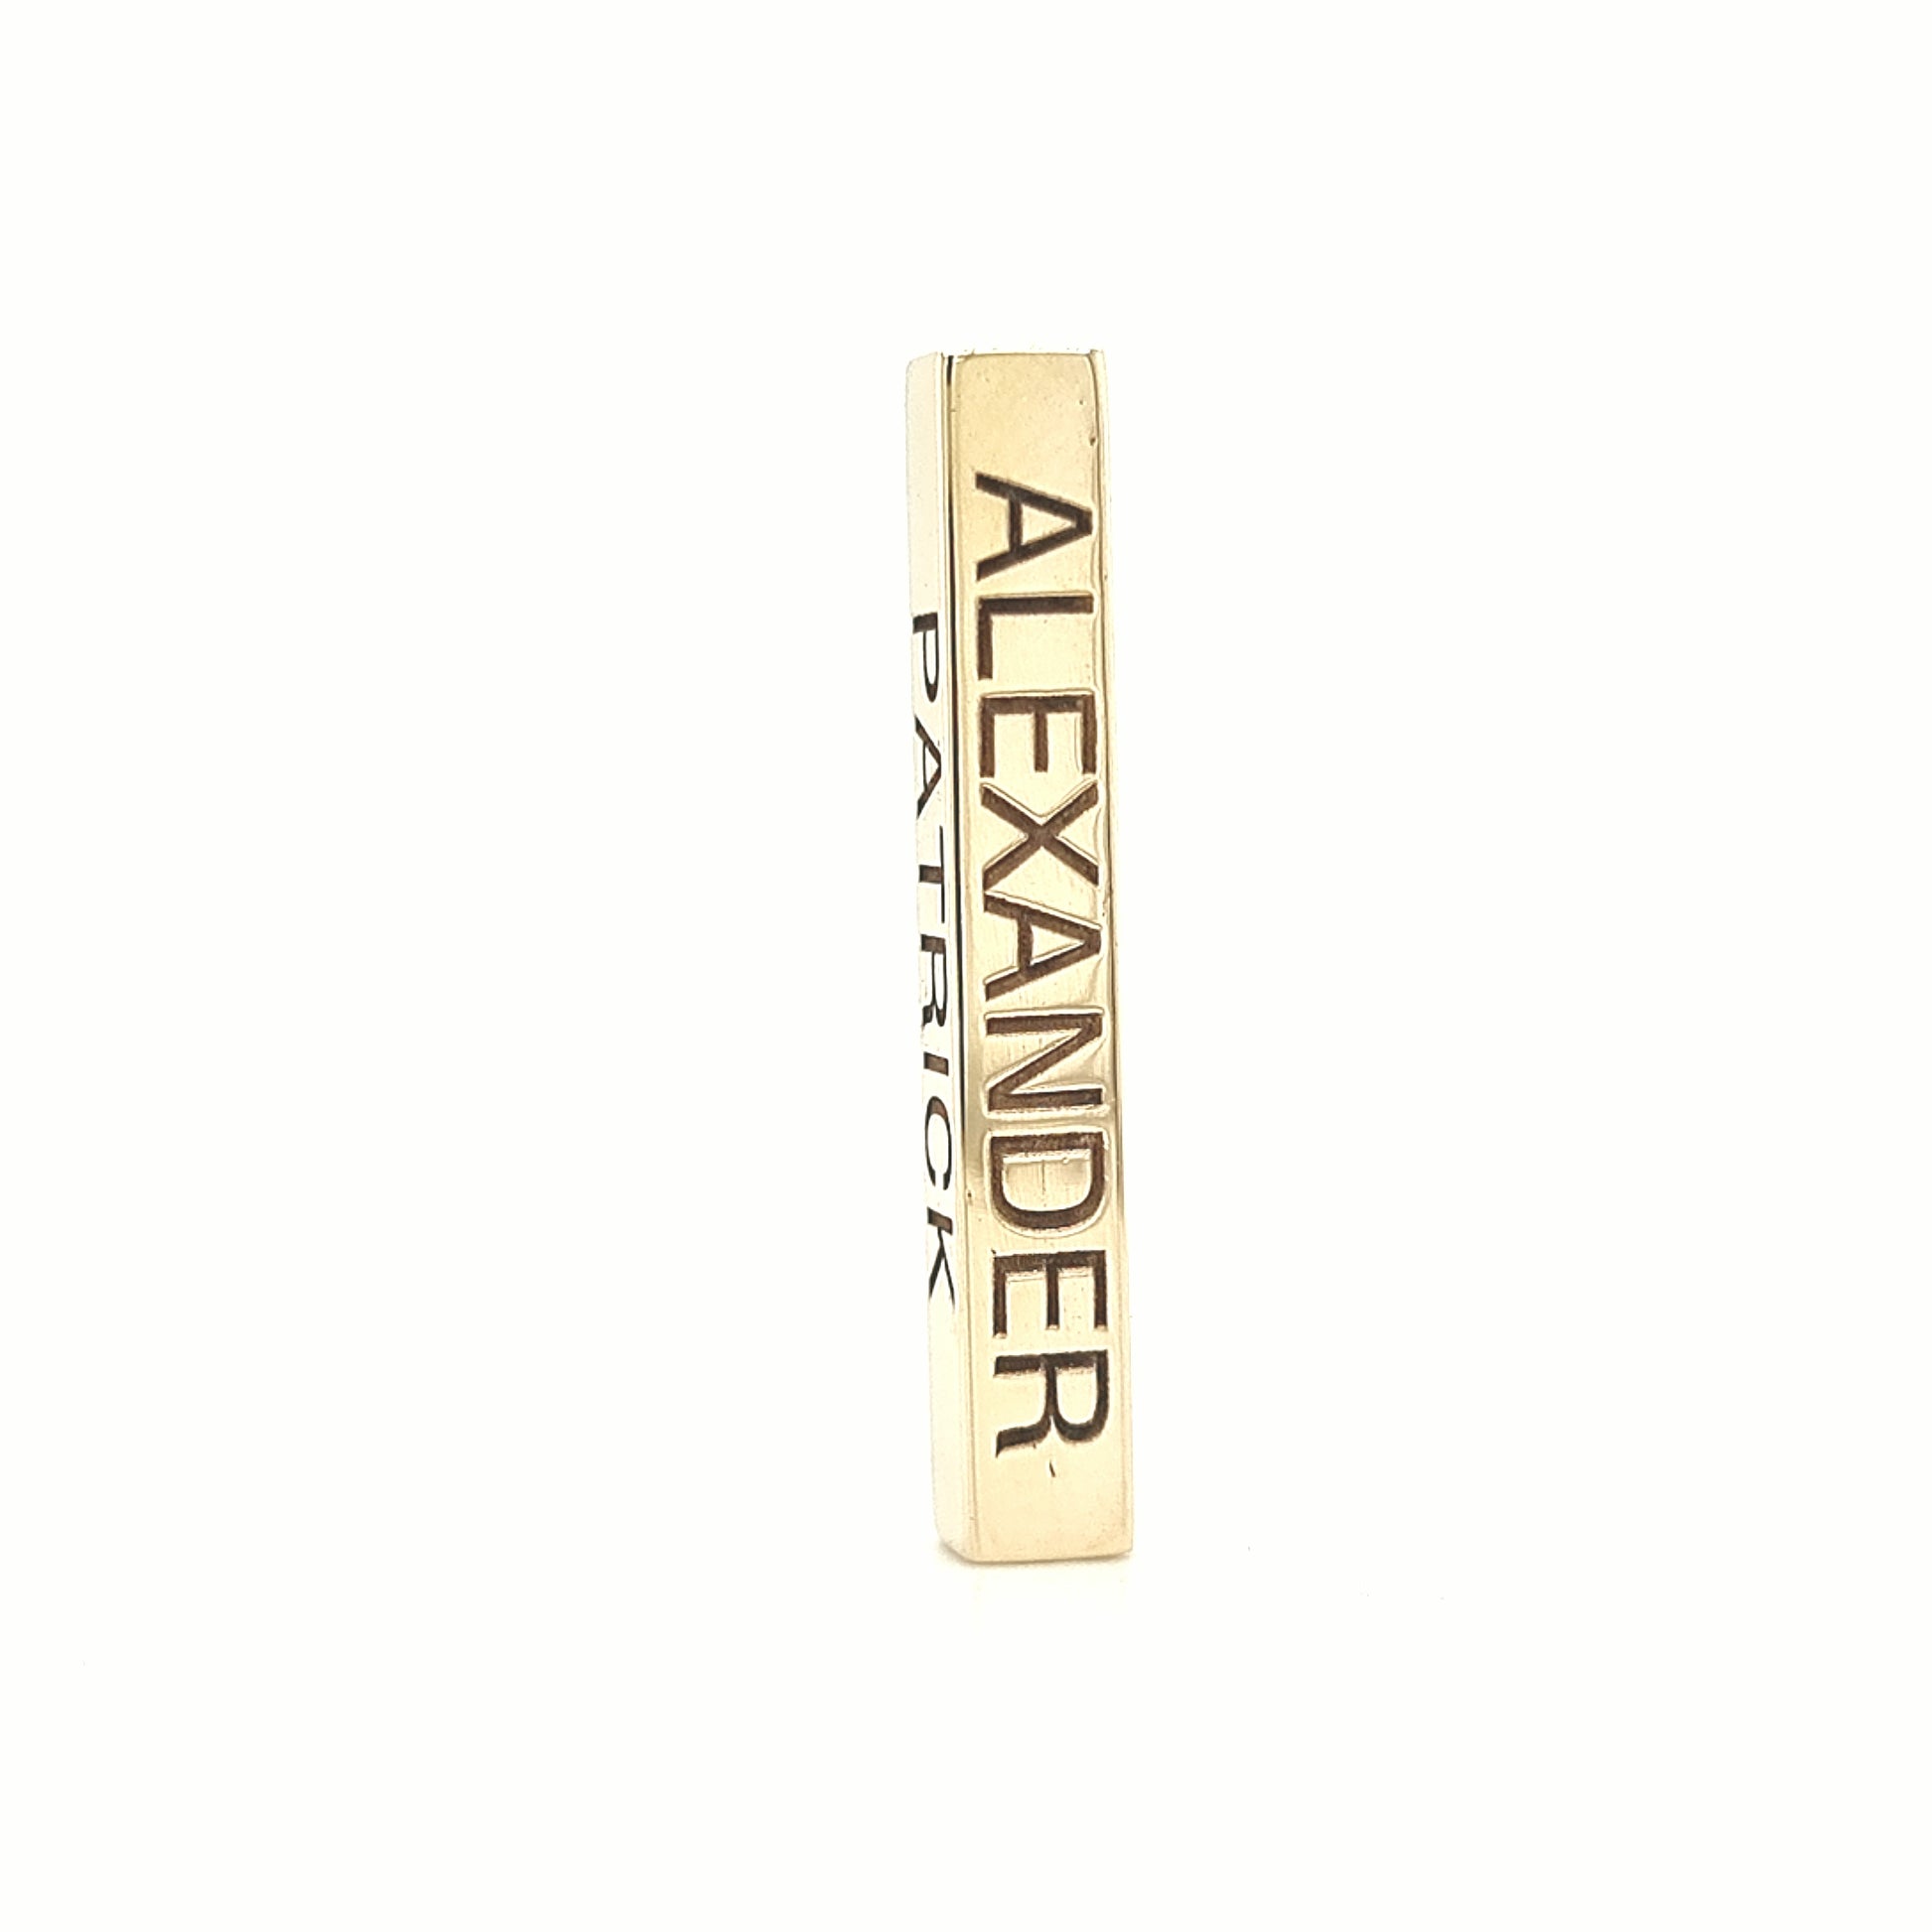 Horizontal 4 Sided Bar Gold Necklace - Prime & Pure